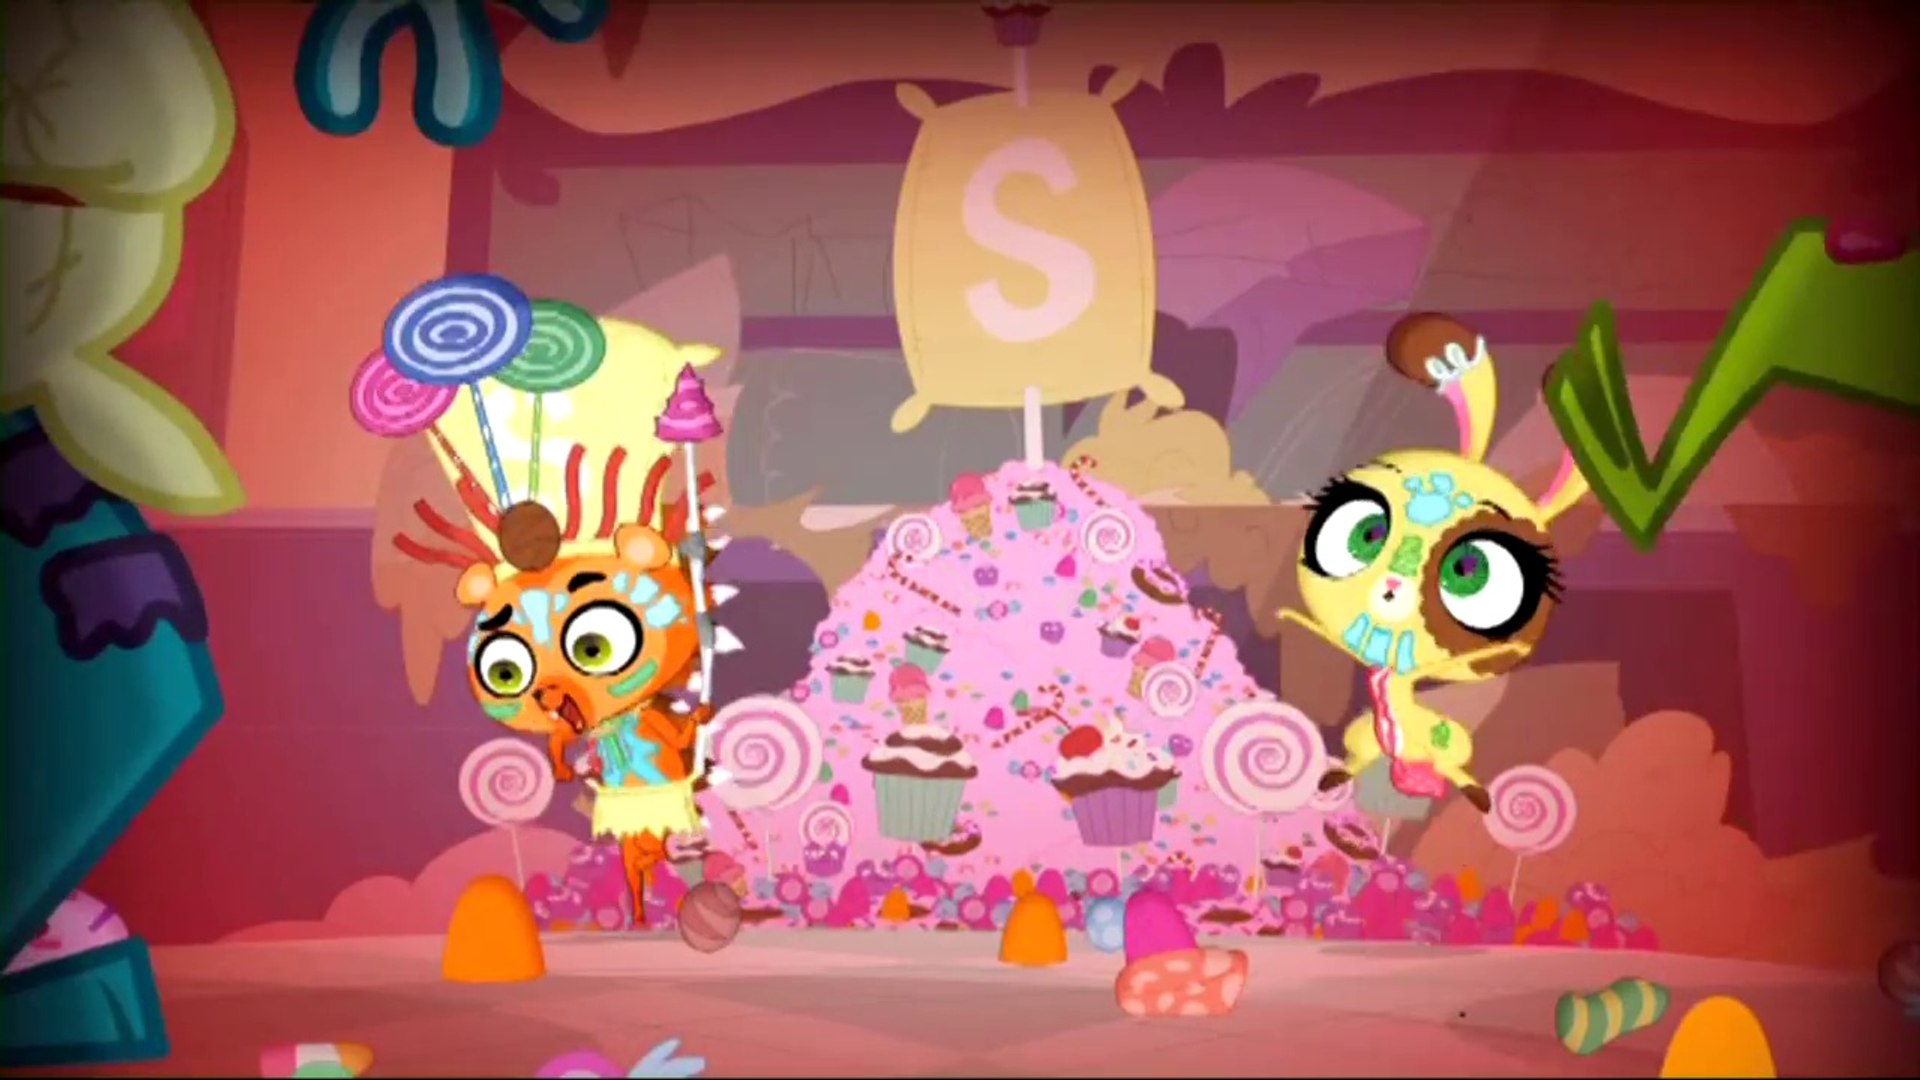 Littlest Pet Shop Cutest Pets Blind Bags Opening - video Dailymotion